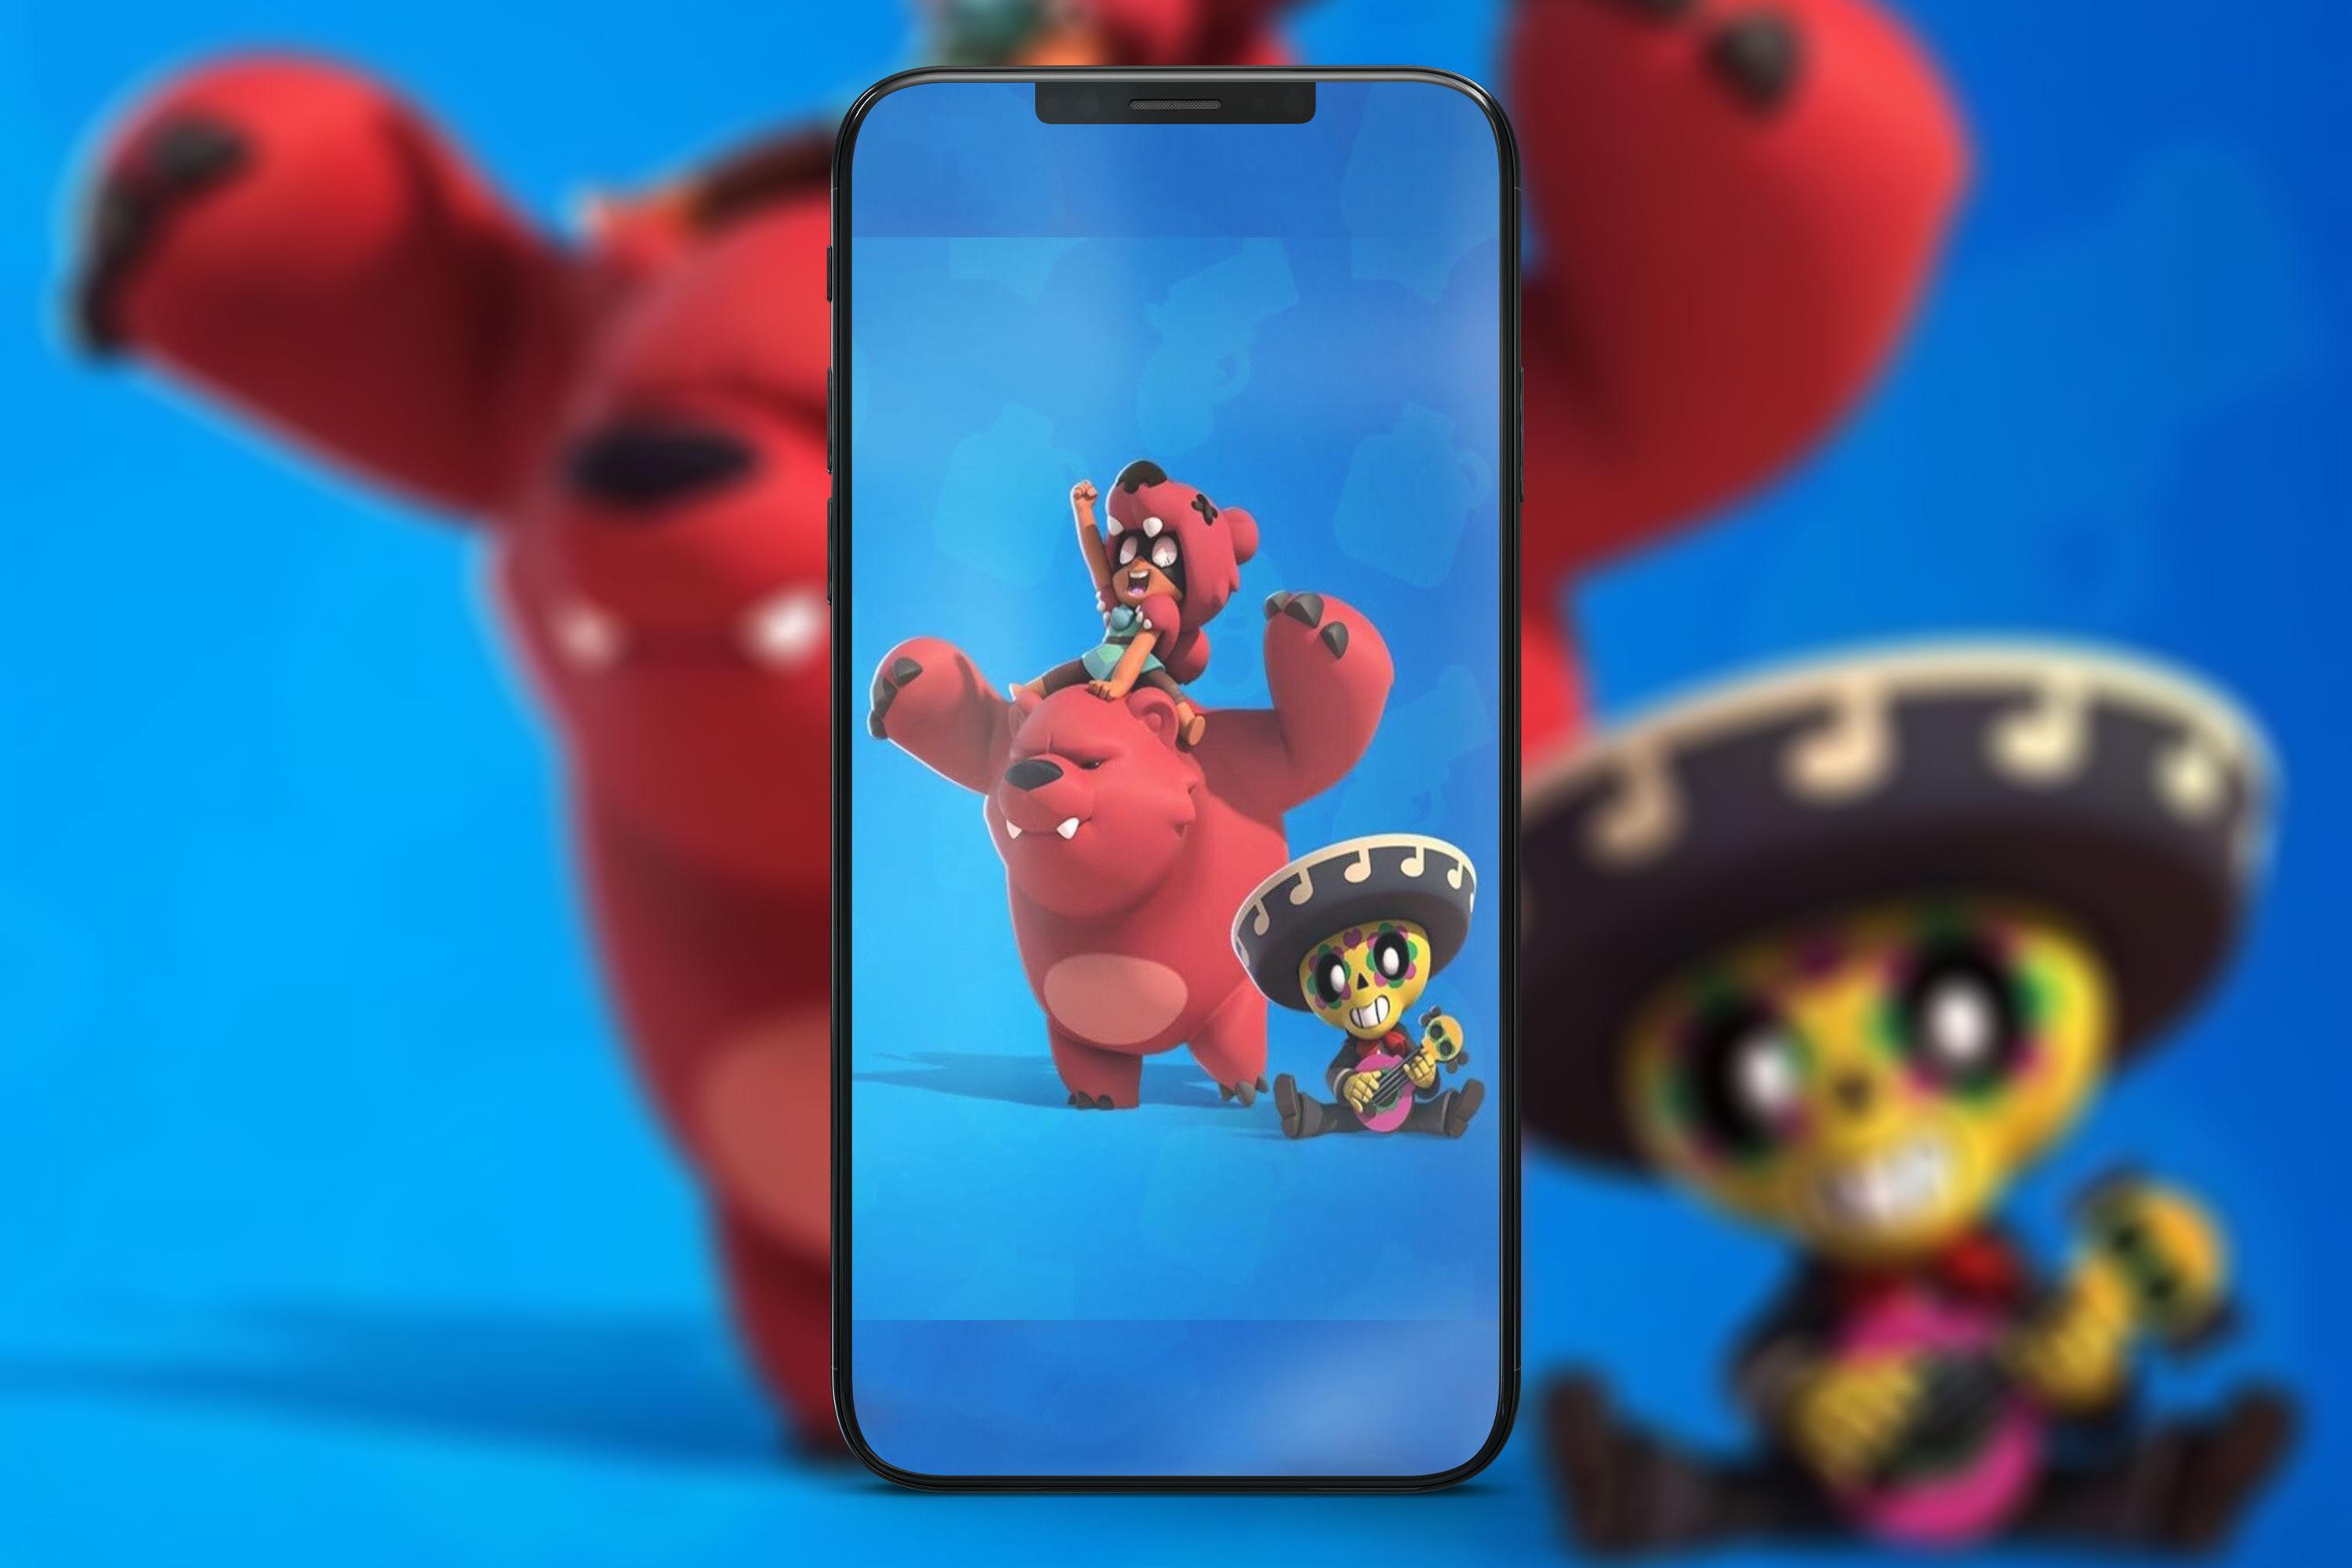 Free Brawl Stars Wallpapers Hd 4k 2020 For Android Apk Download - cover telefono brawl stars